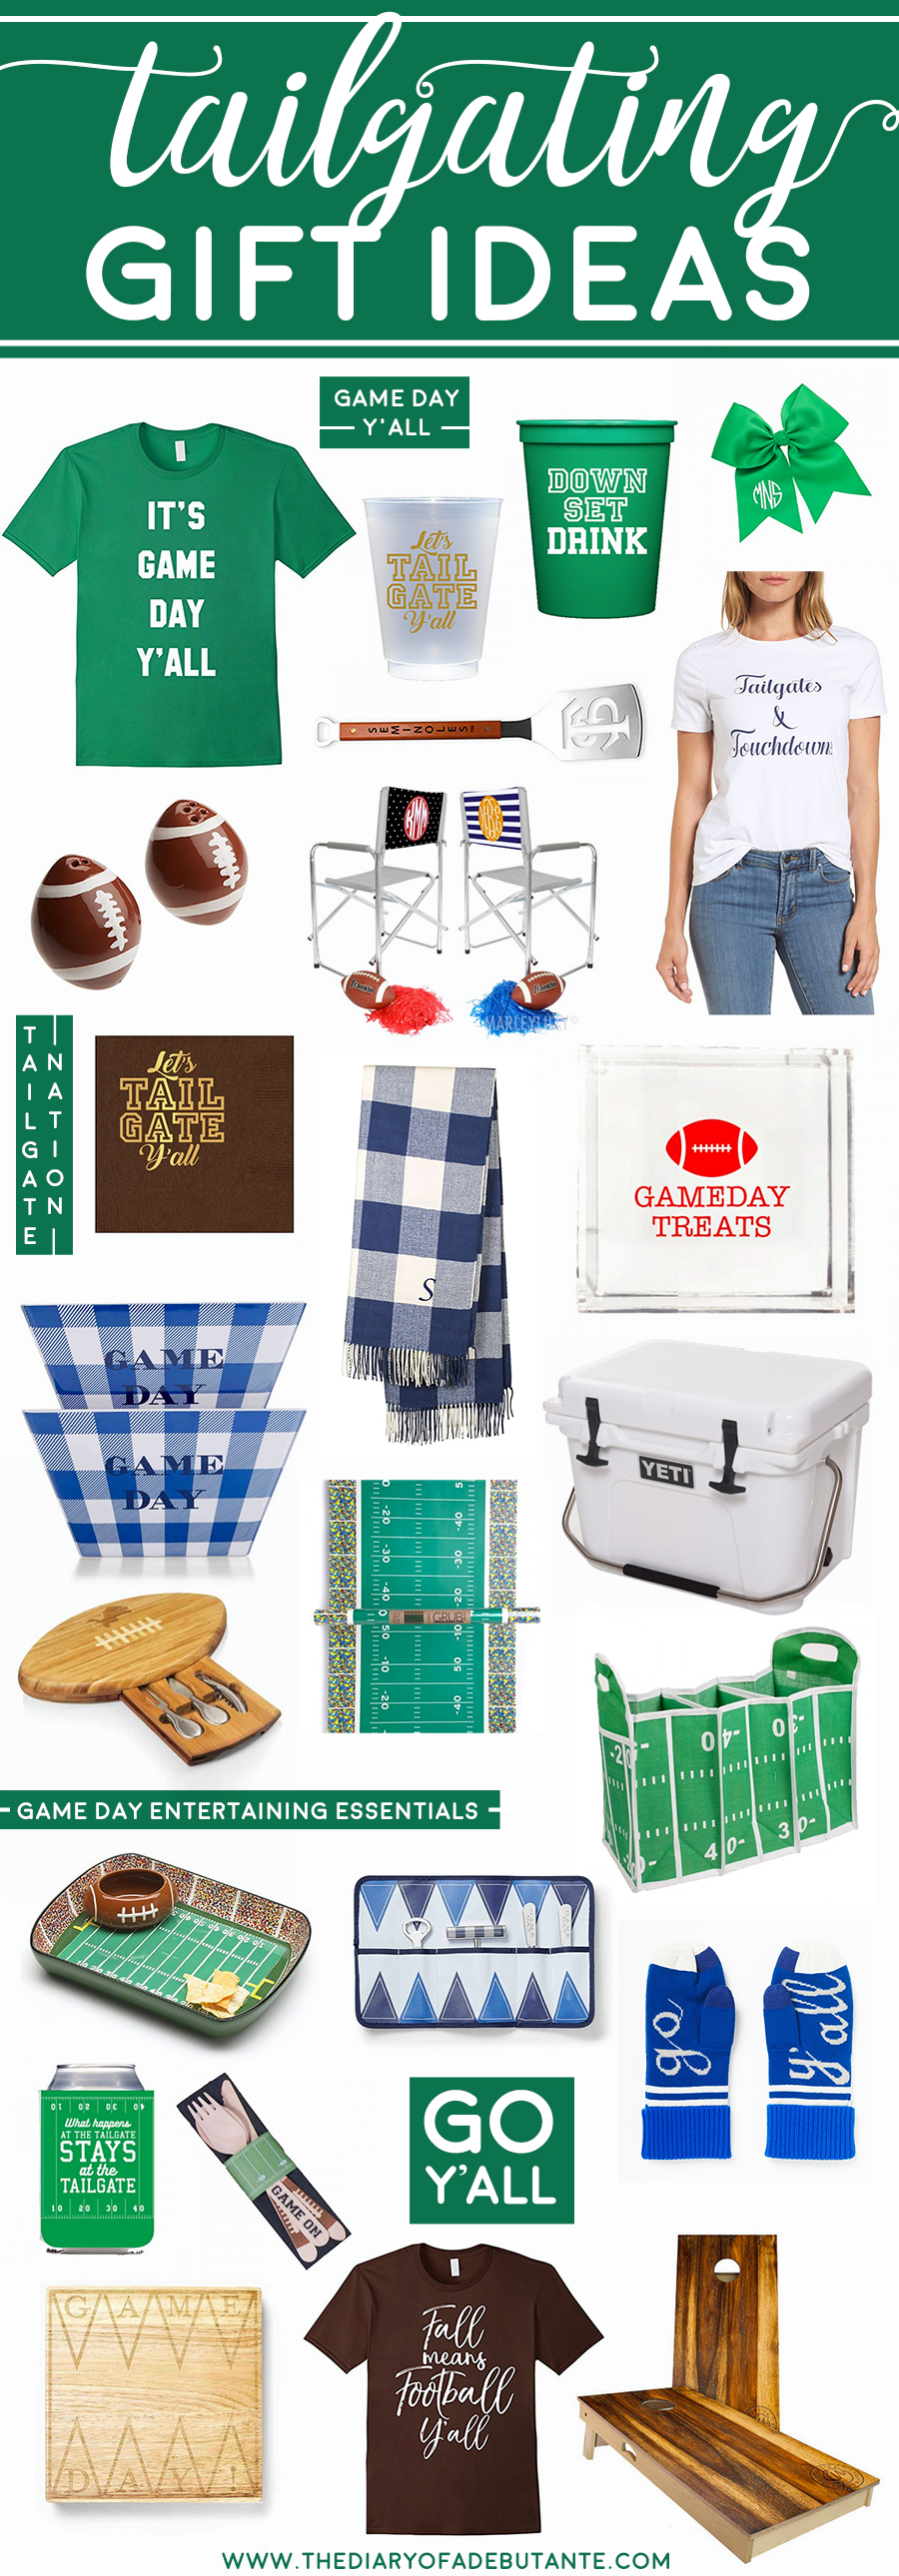 Tailgating Gift Ideas by southern lifestyle blogger Stephanie Ziajka from Diary of a Debutante